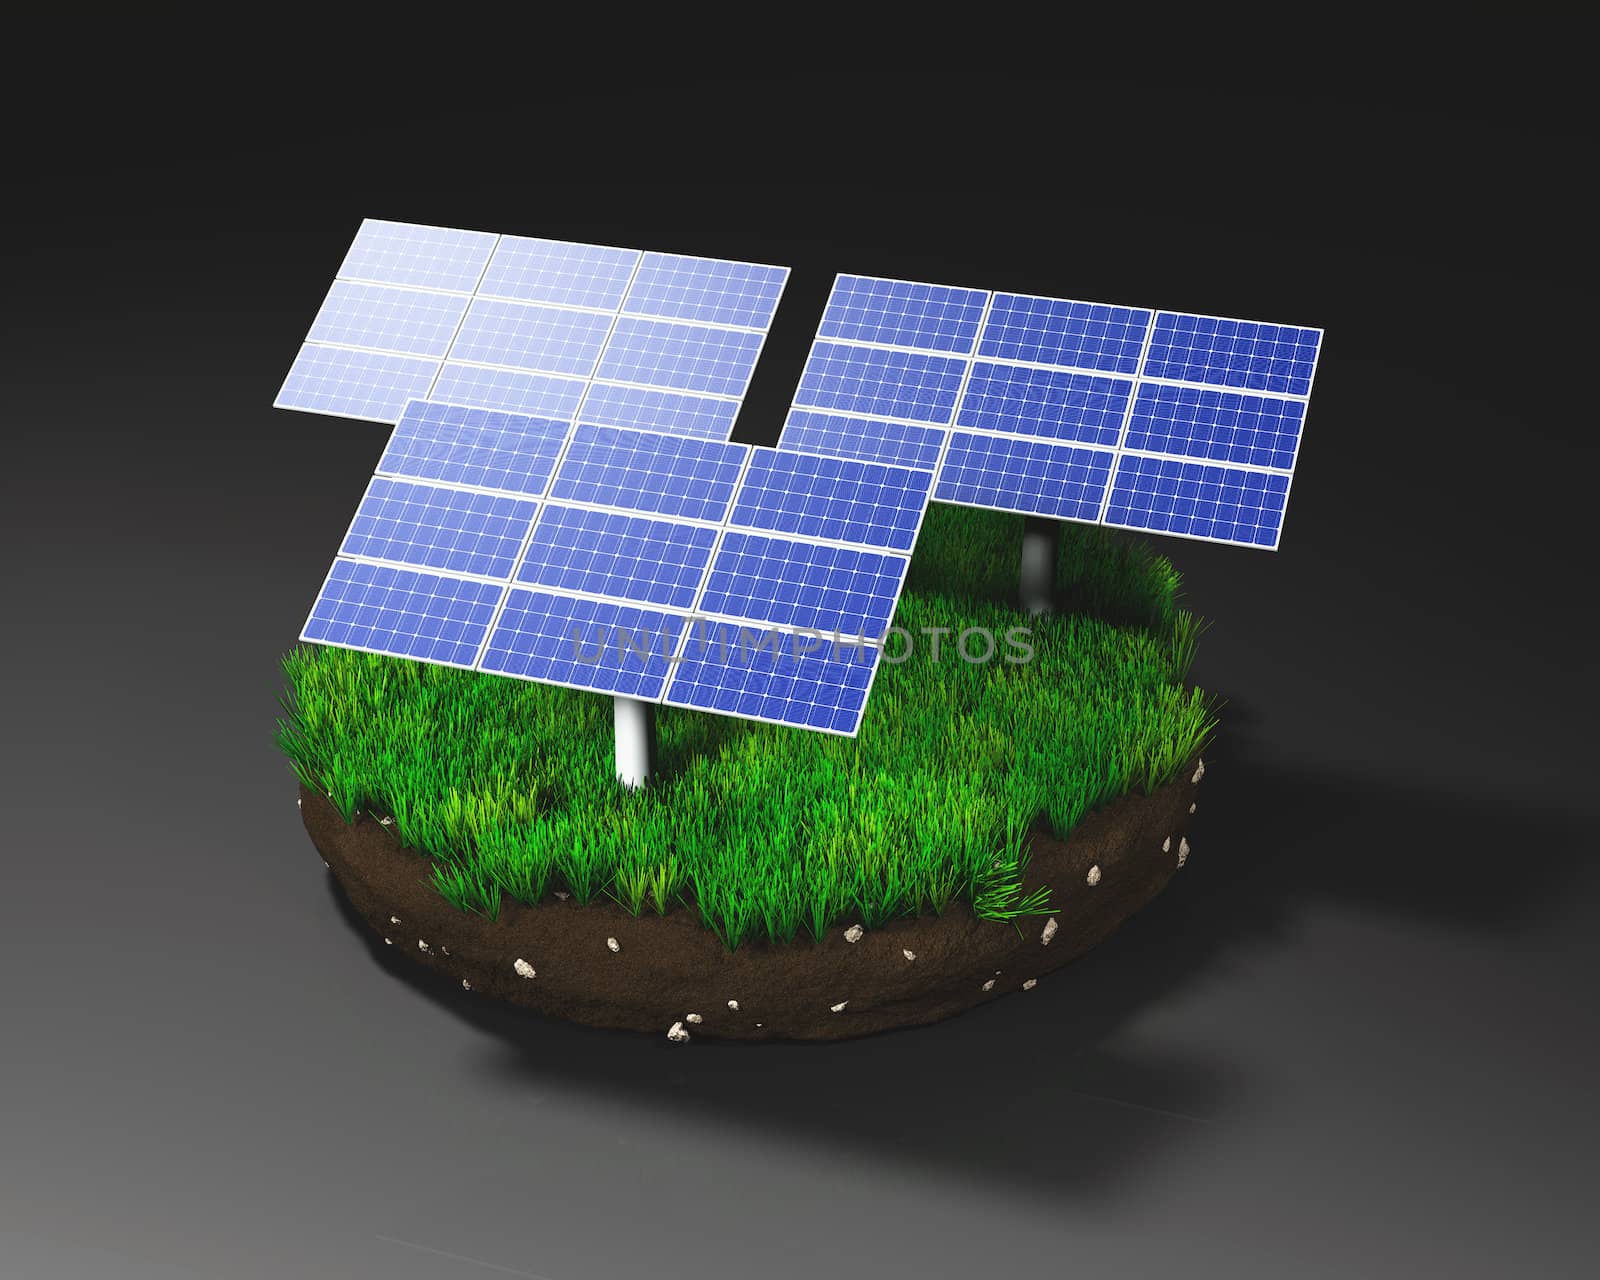 three solar panels on a grassy round clod of earth isolated on a dark background.